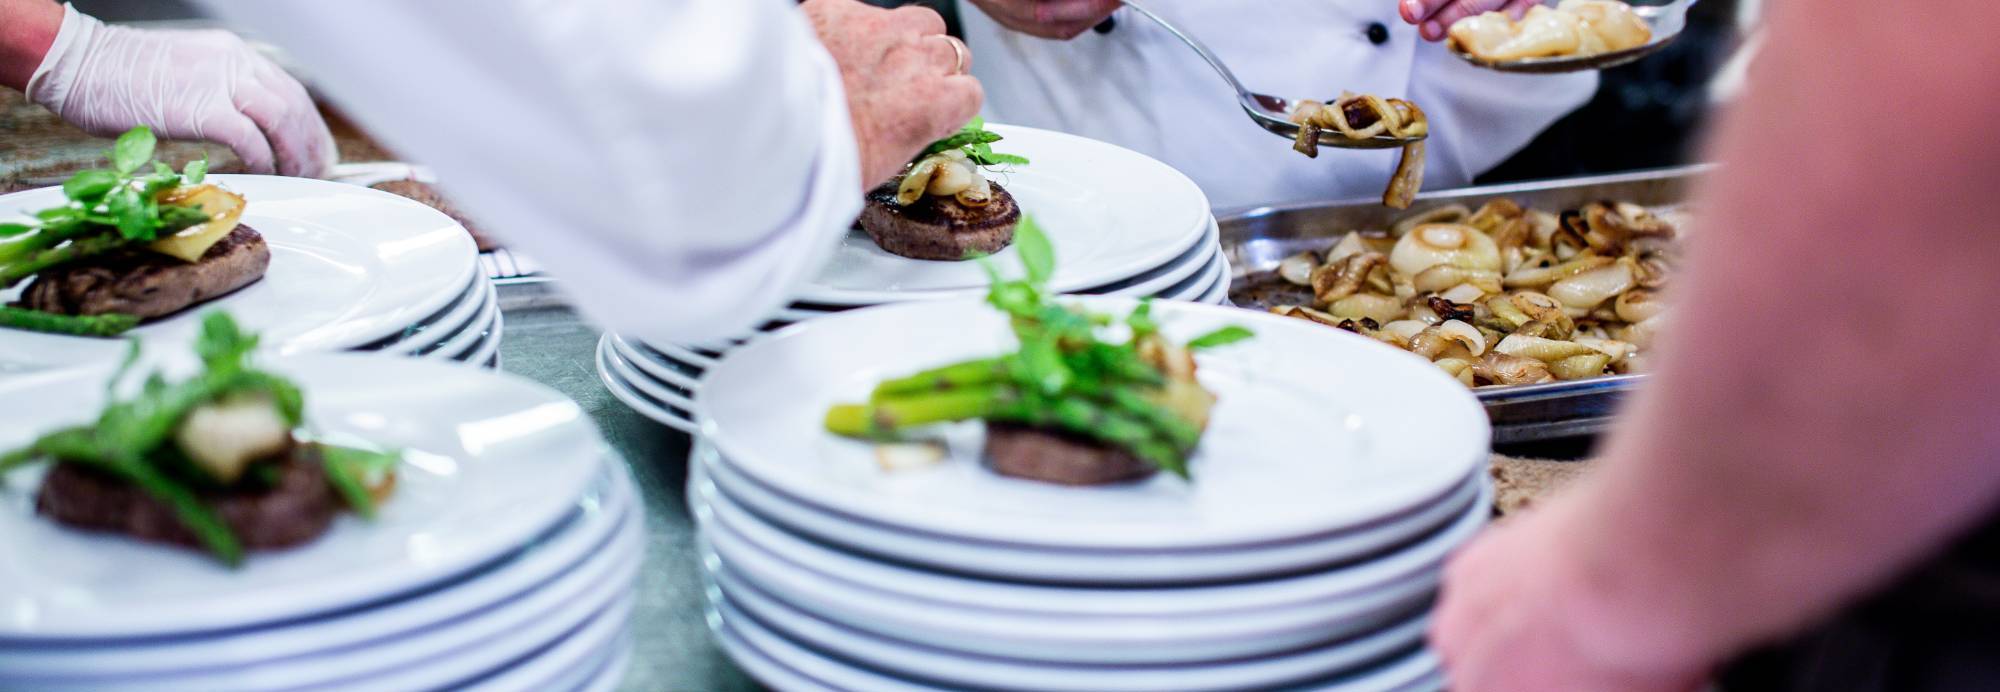 food being plated for service